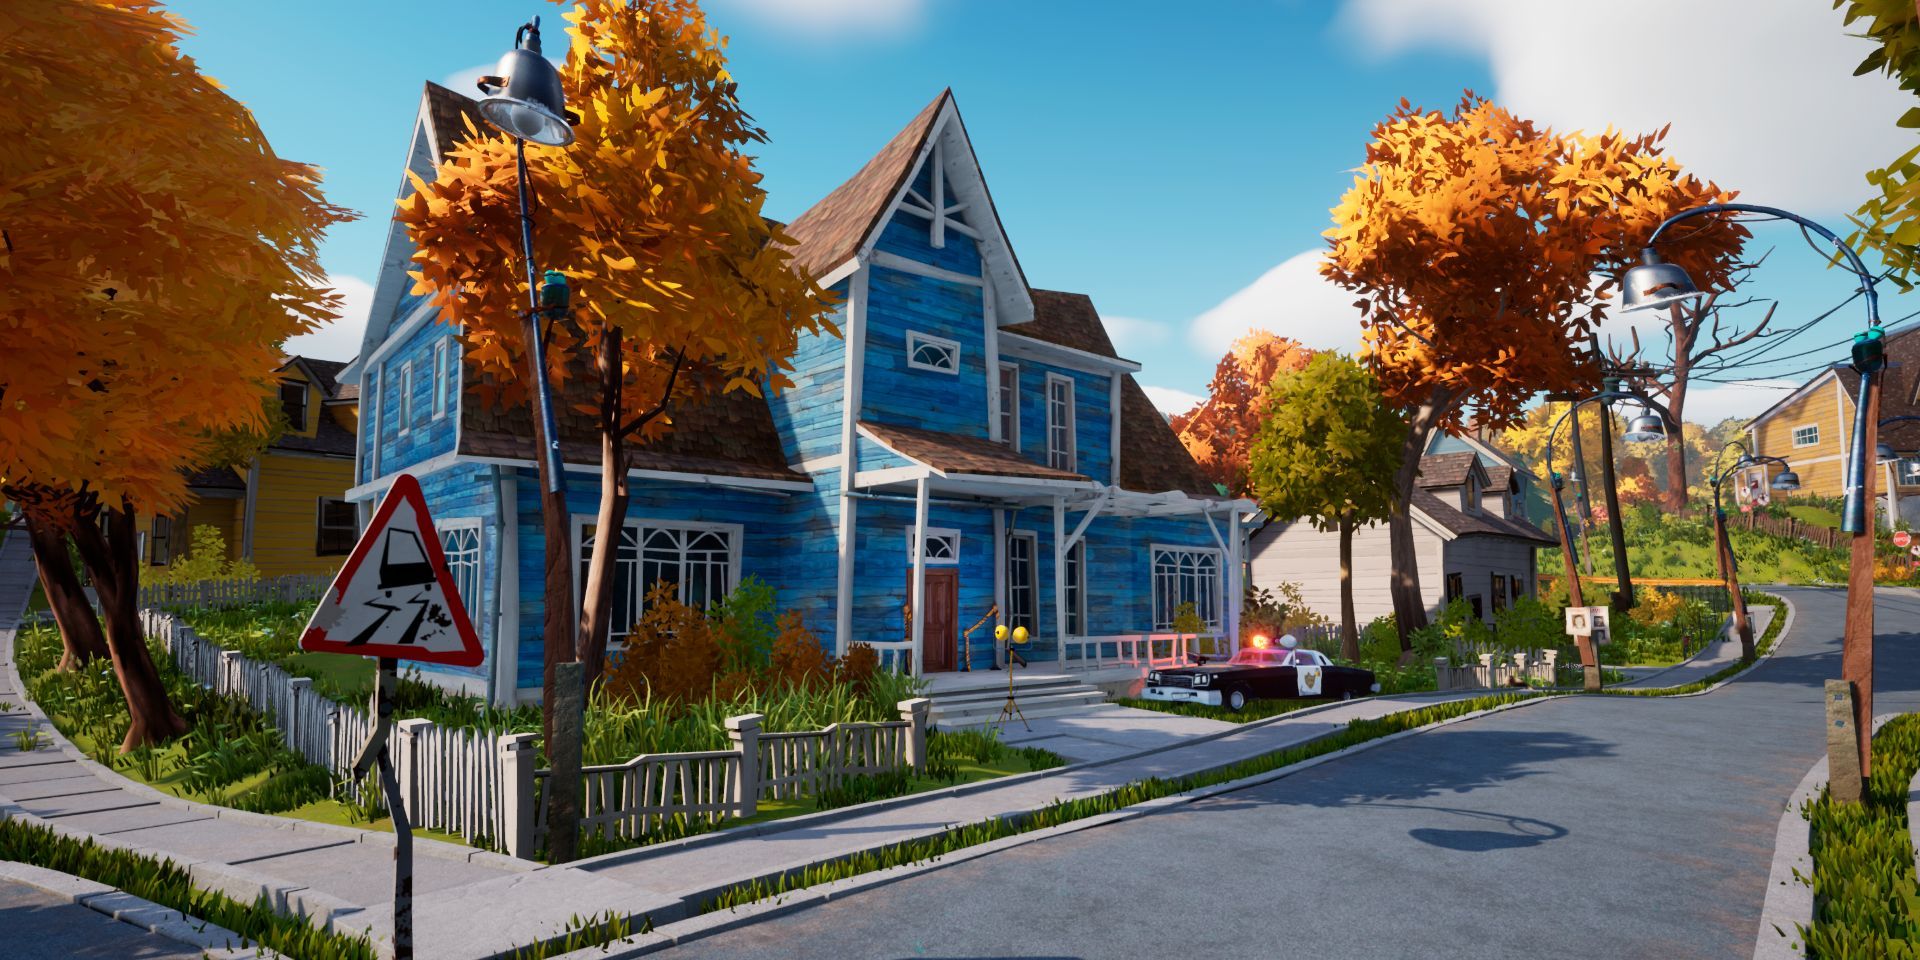 A picture from Hello Neighbor 2 showing one of the building the player can enter